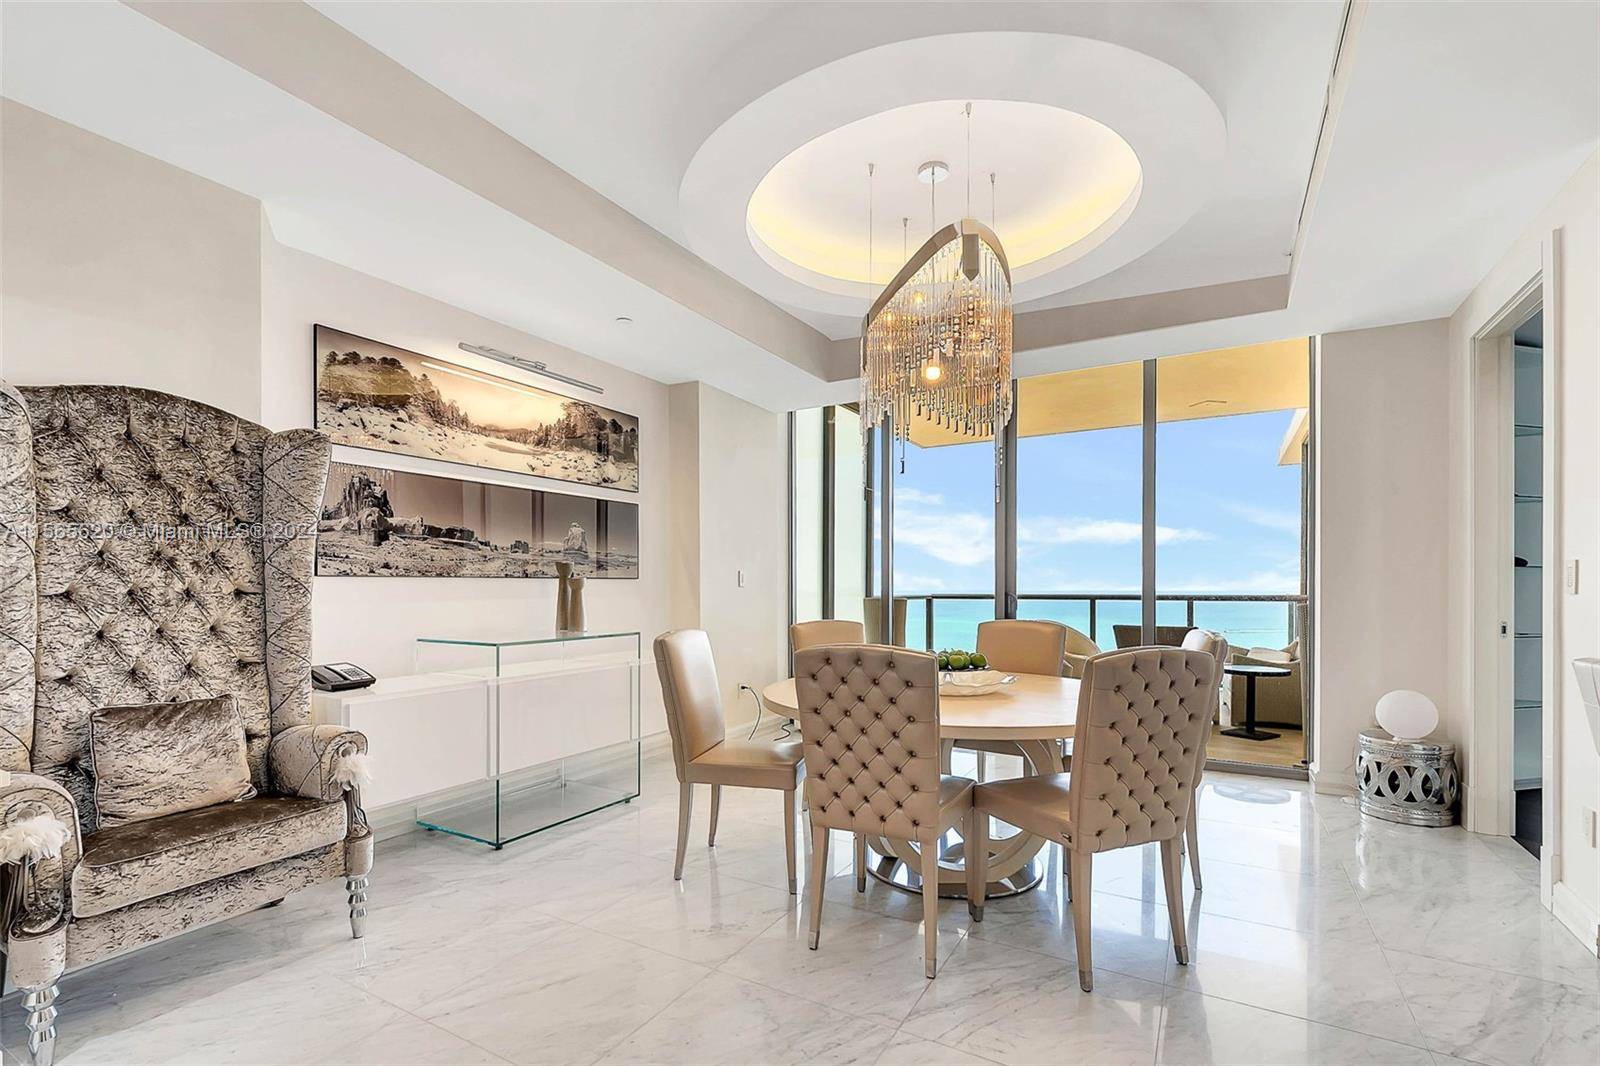 Elegant, Sophisticated One of A Kind Ocean Front Penthouse.